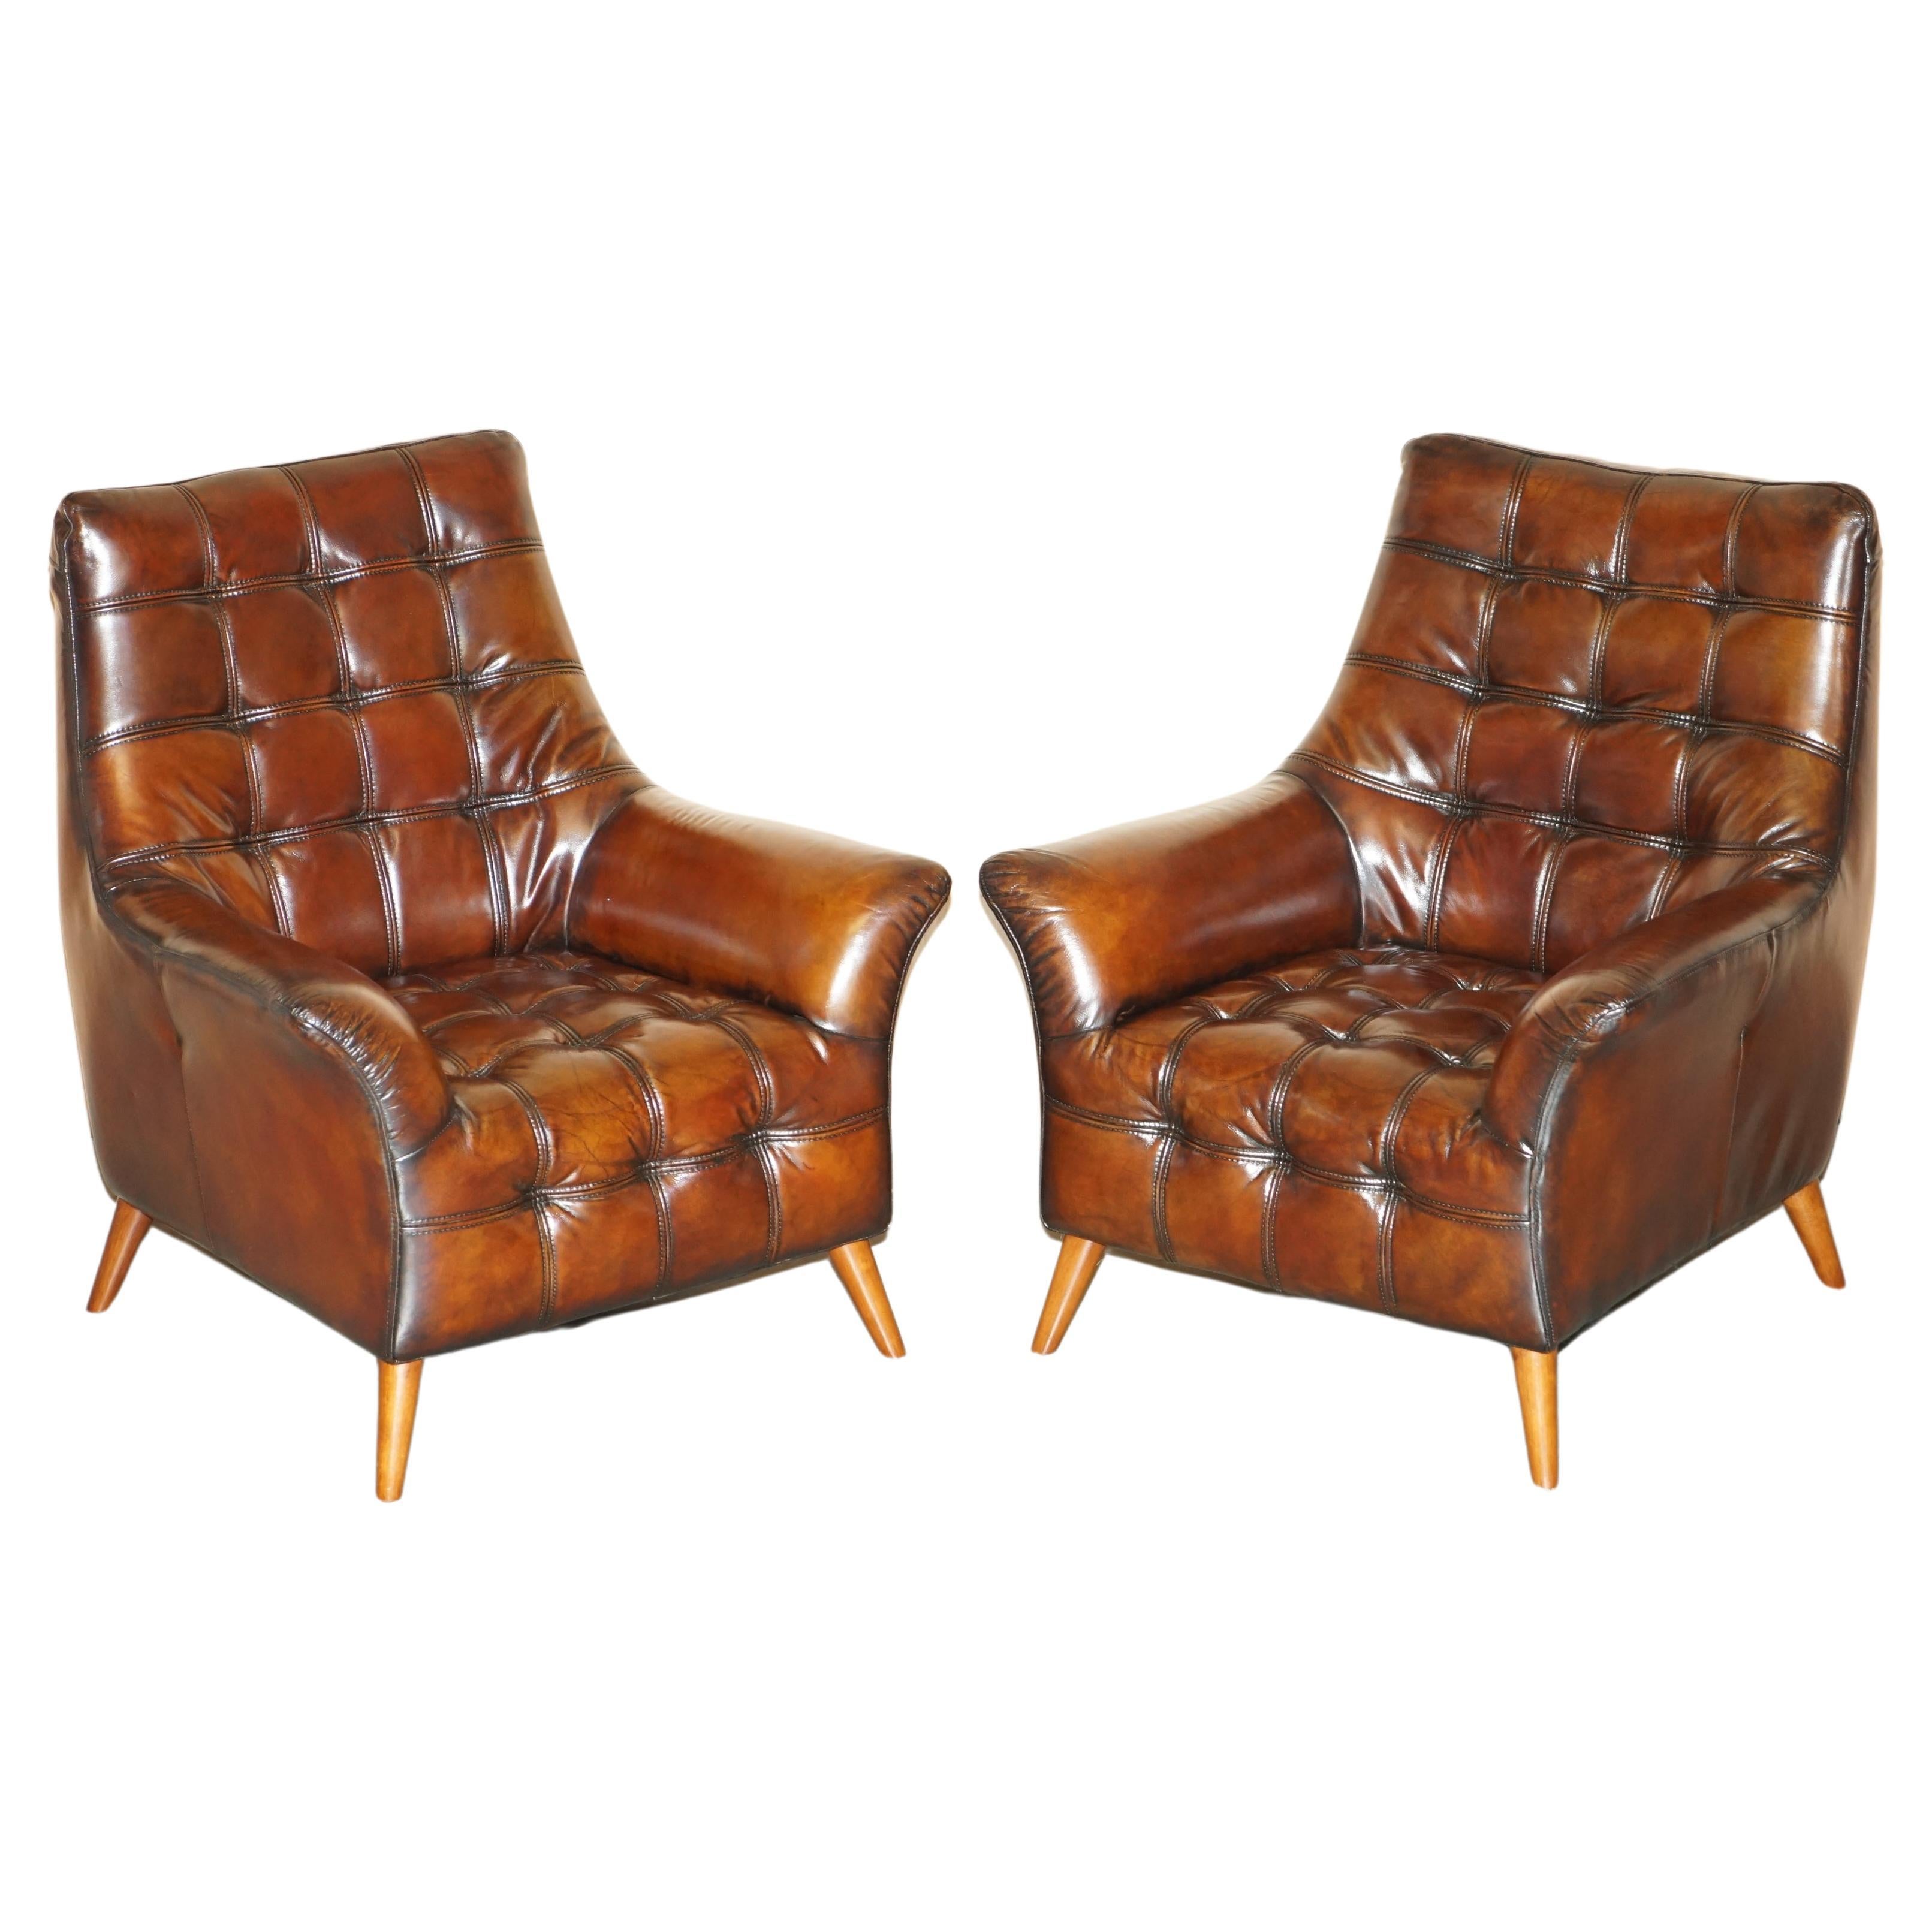 PAIR OF FULLY RESTORED HAND DYED CHESTERFiELD WHISKY BROWN LEATHER ARMCHAIRS For Sale